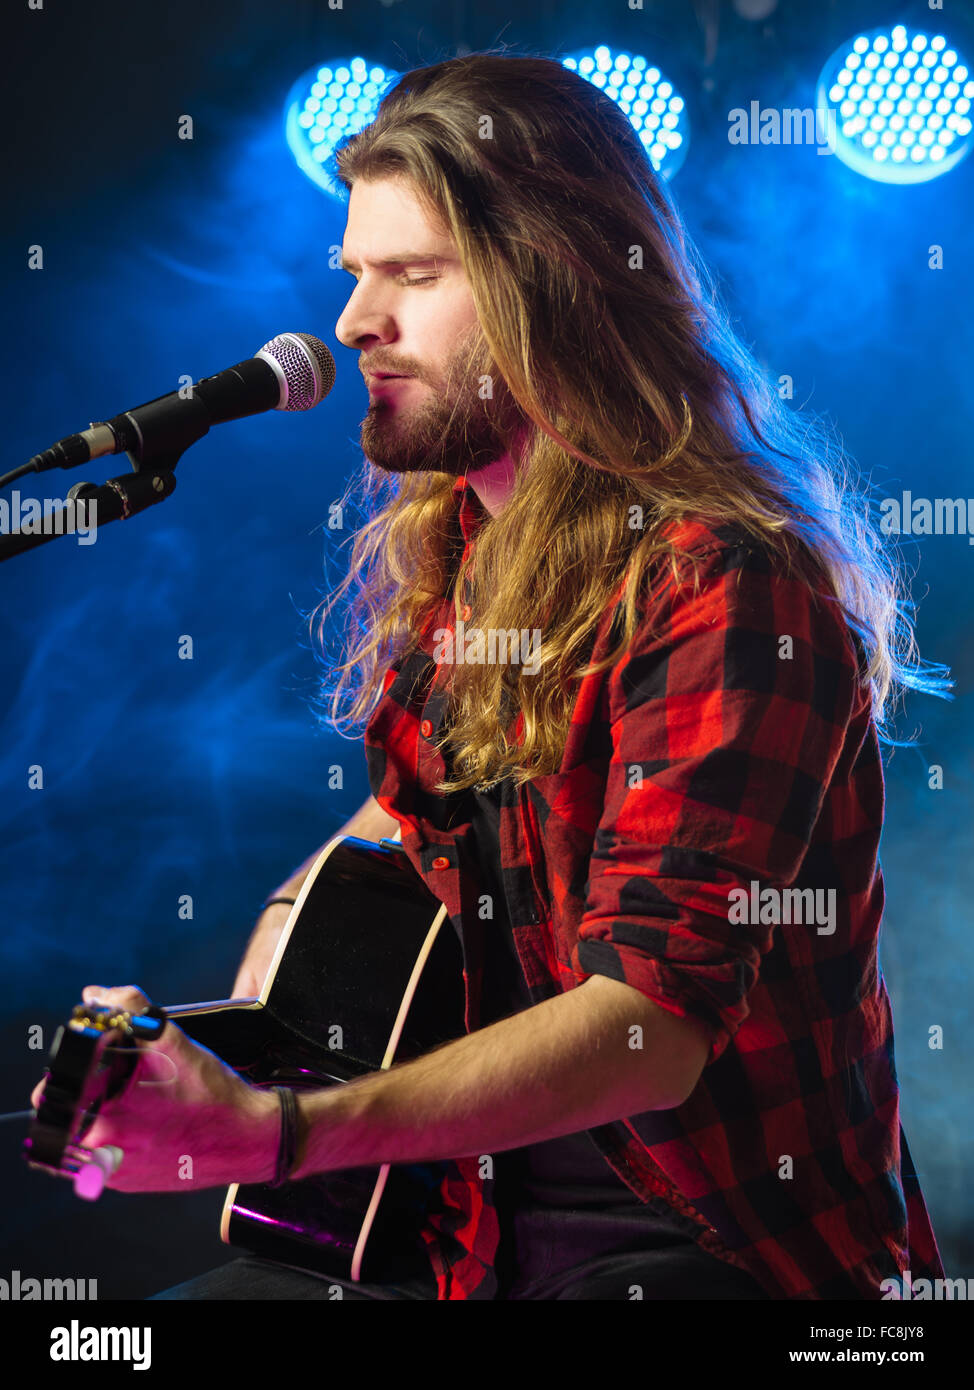 Photo Of A Young Man With Long Hair And A Beard Singing And